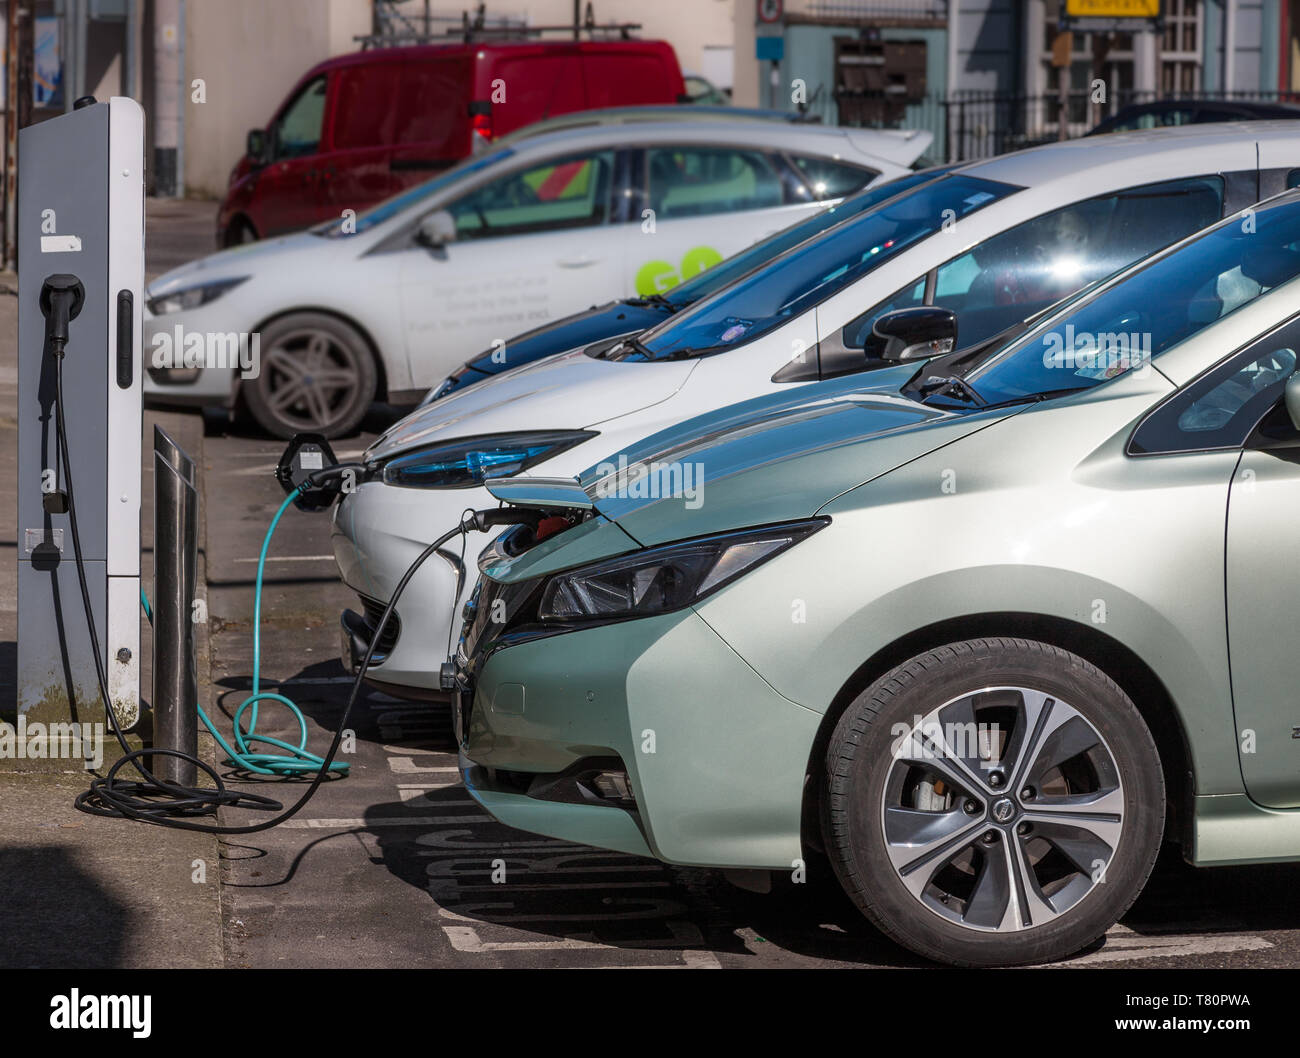 Cork City, Cork, Ireland. 10th May, 2019. Two new ecar charging points have been installed in Copley Street in Cork, Ireland. Thers are now over 1,100 public charge points available across the island of Ireland and a Government incentive which offers up to €5,000 grant per vehicle and up to €5,000 Vehicle Registration Tax relief to encourage drivers to swap to a environmental cleaner  type of transport. Credit: David Creedon/Alamy Live News Stock Photo